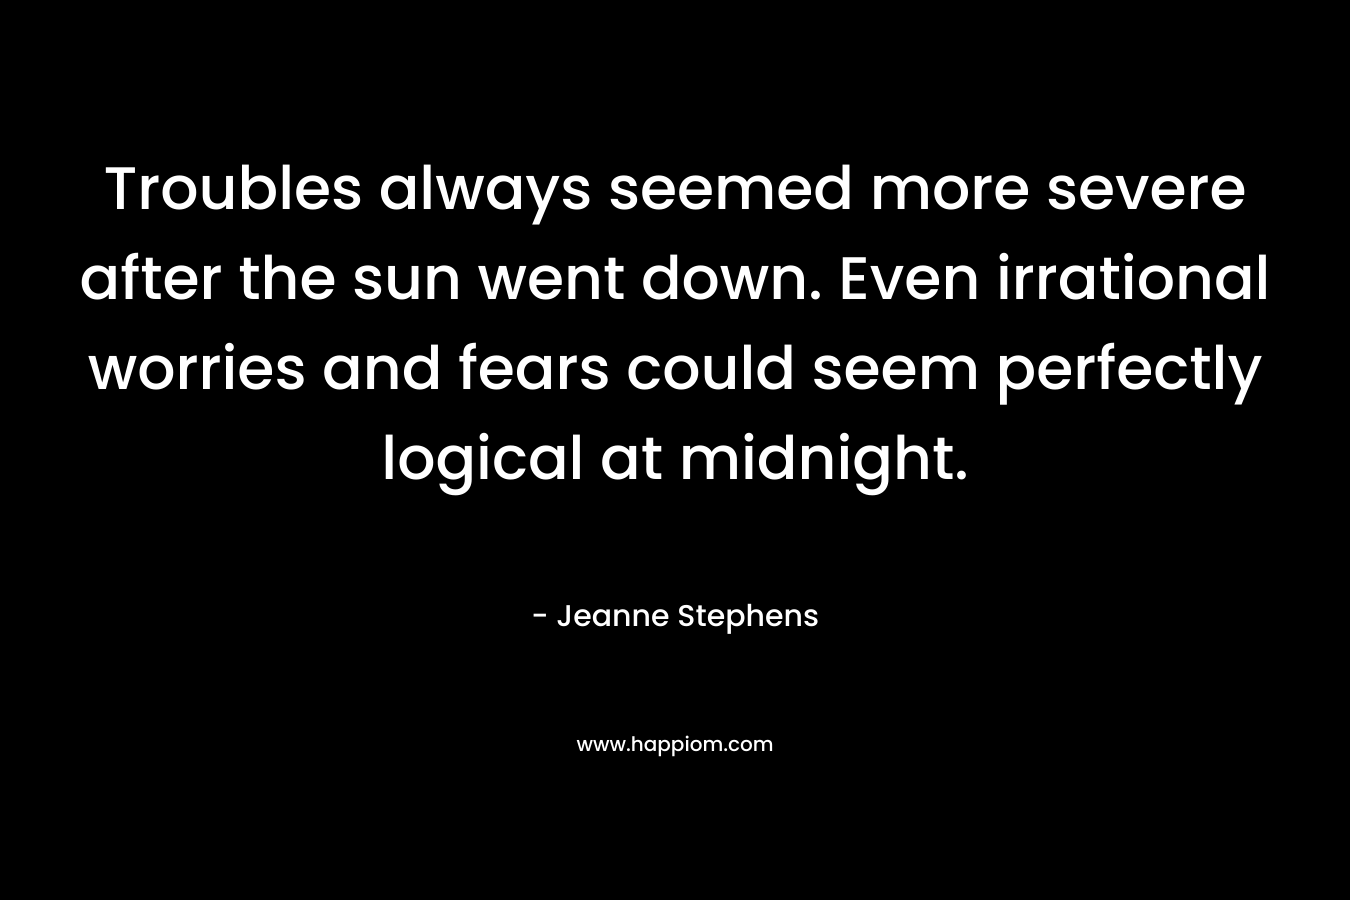 Troubles always seemed more severe after the sun went down. Even irrational worries and fears could seem perfectly logical at midnight.